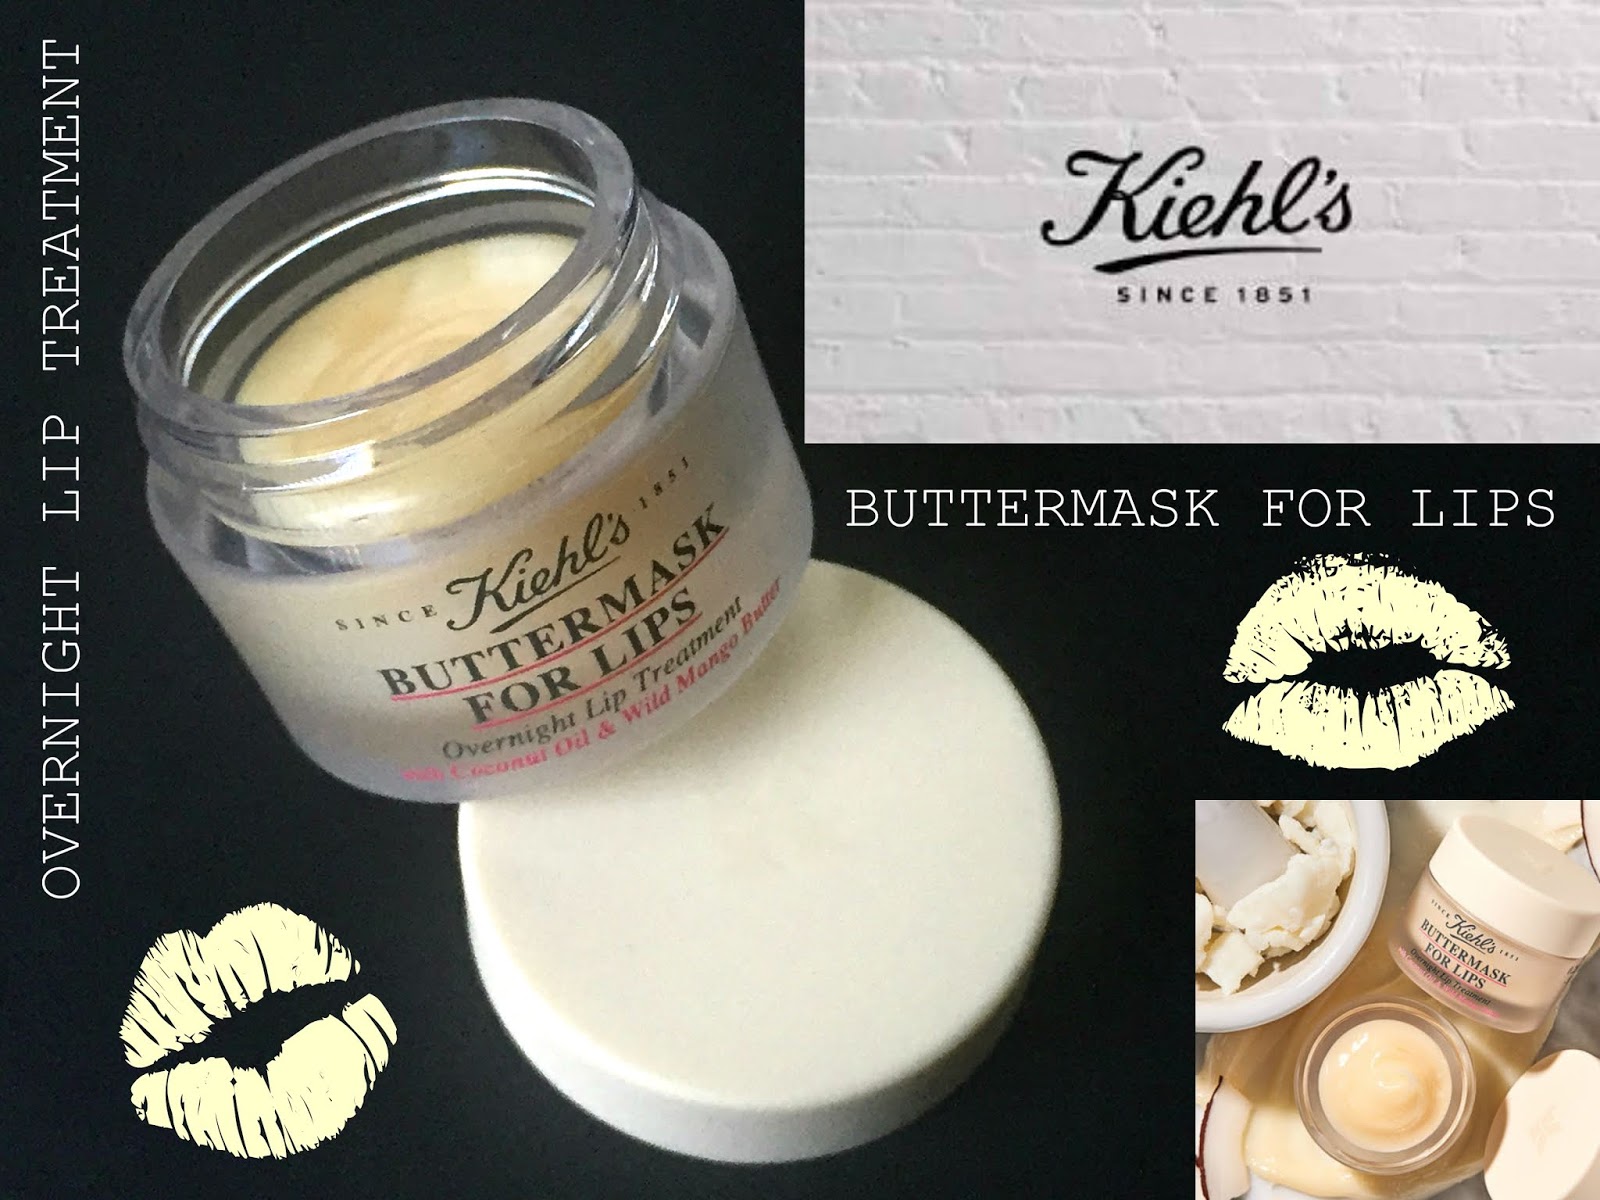 Kiehl's Buttermask For Lips Overnight Lip Treatment Review